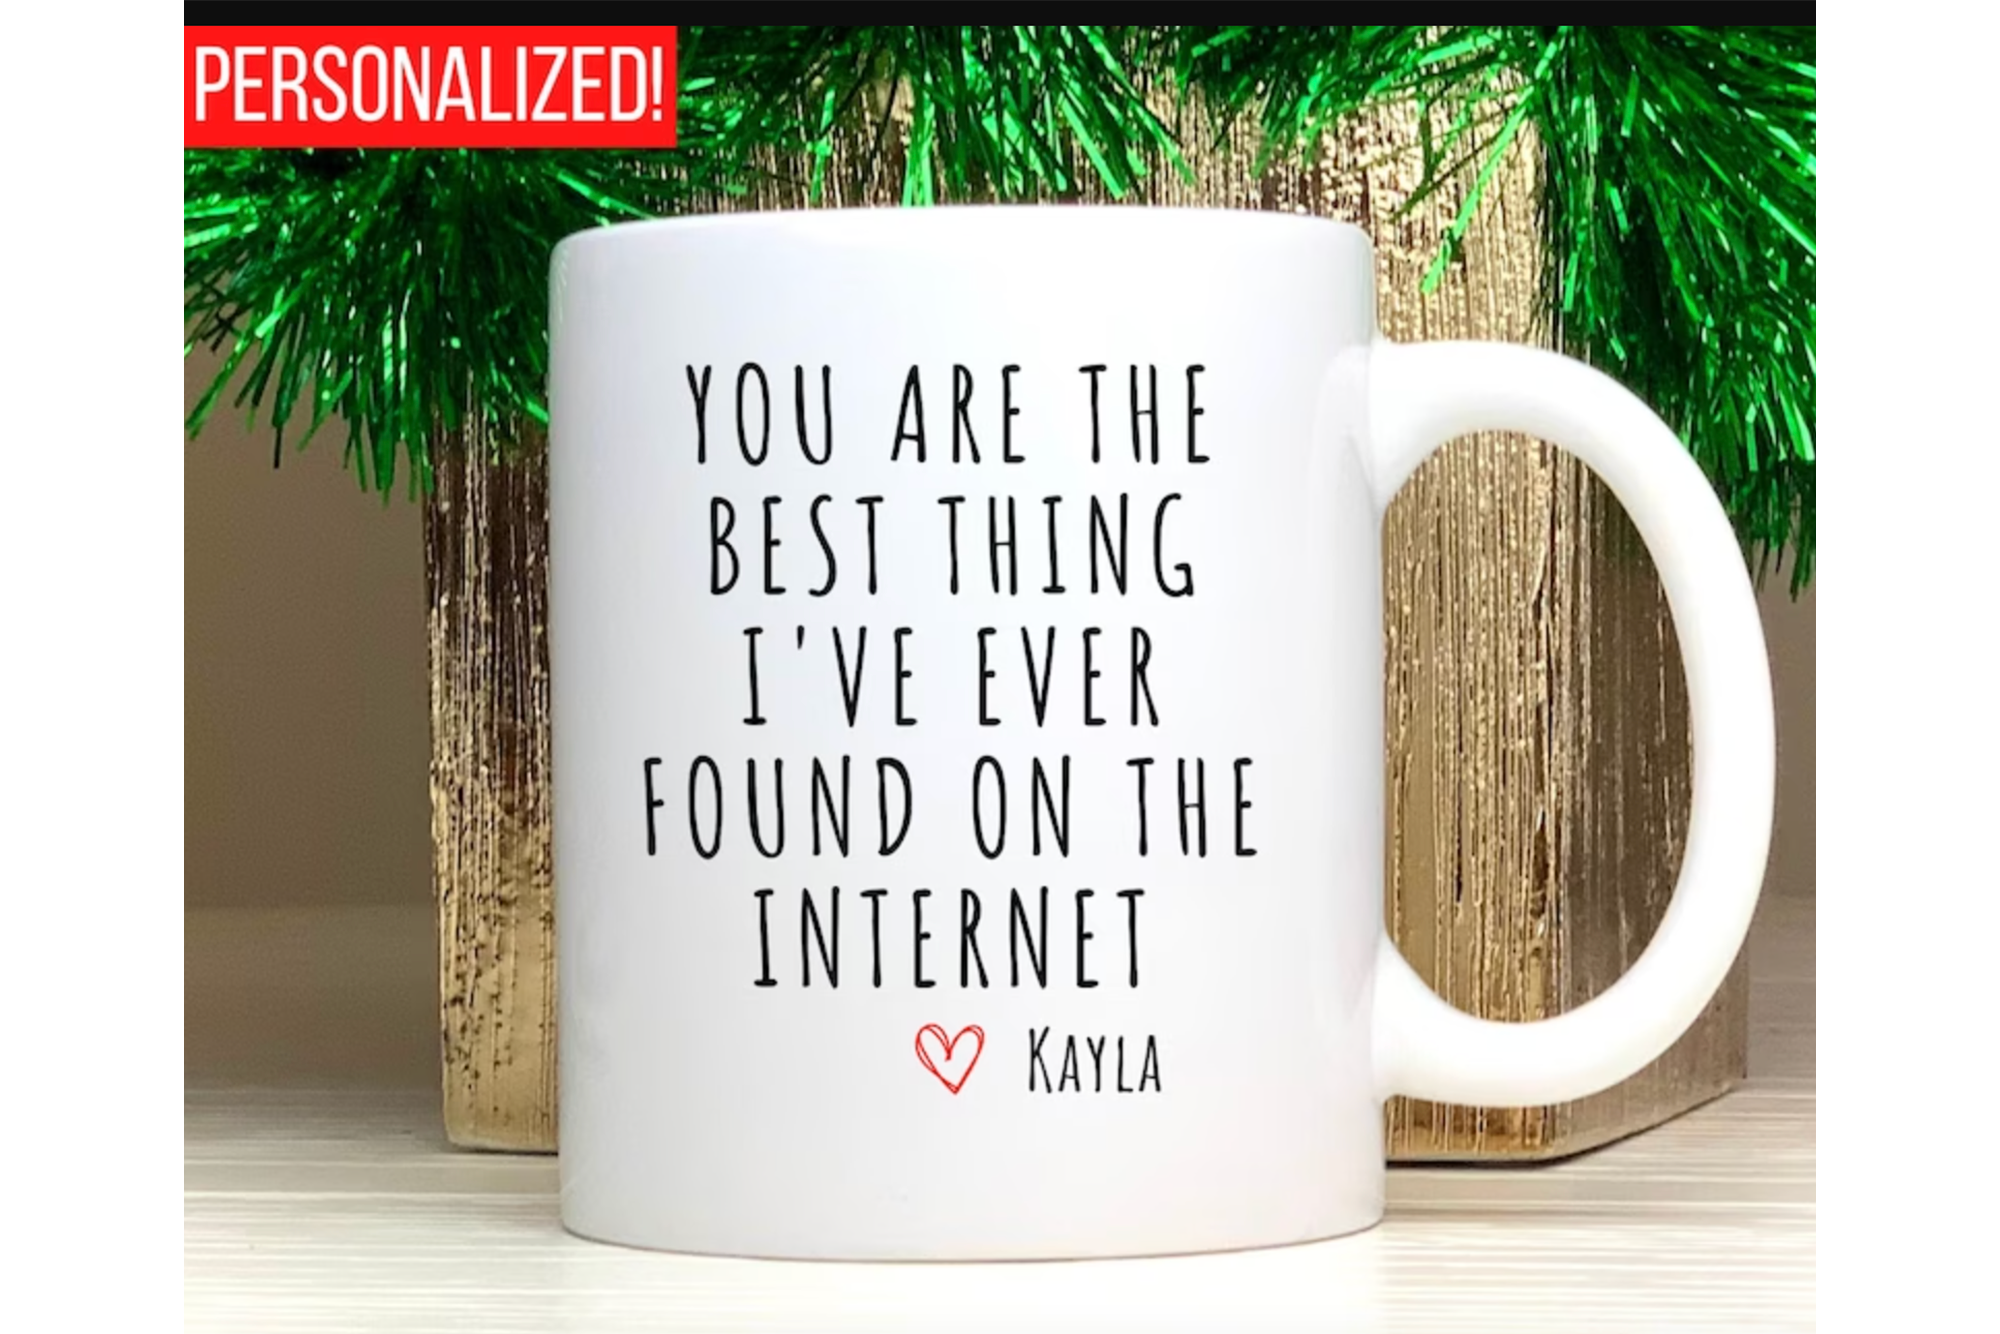 "You Are the Best Thing I've Ever Found on the Internet" Personalized Mug